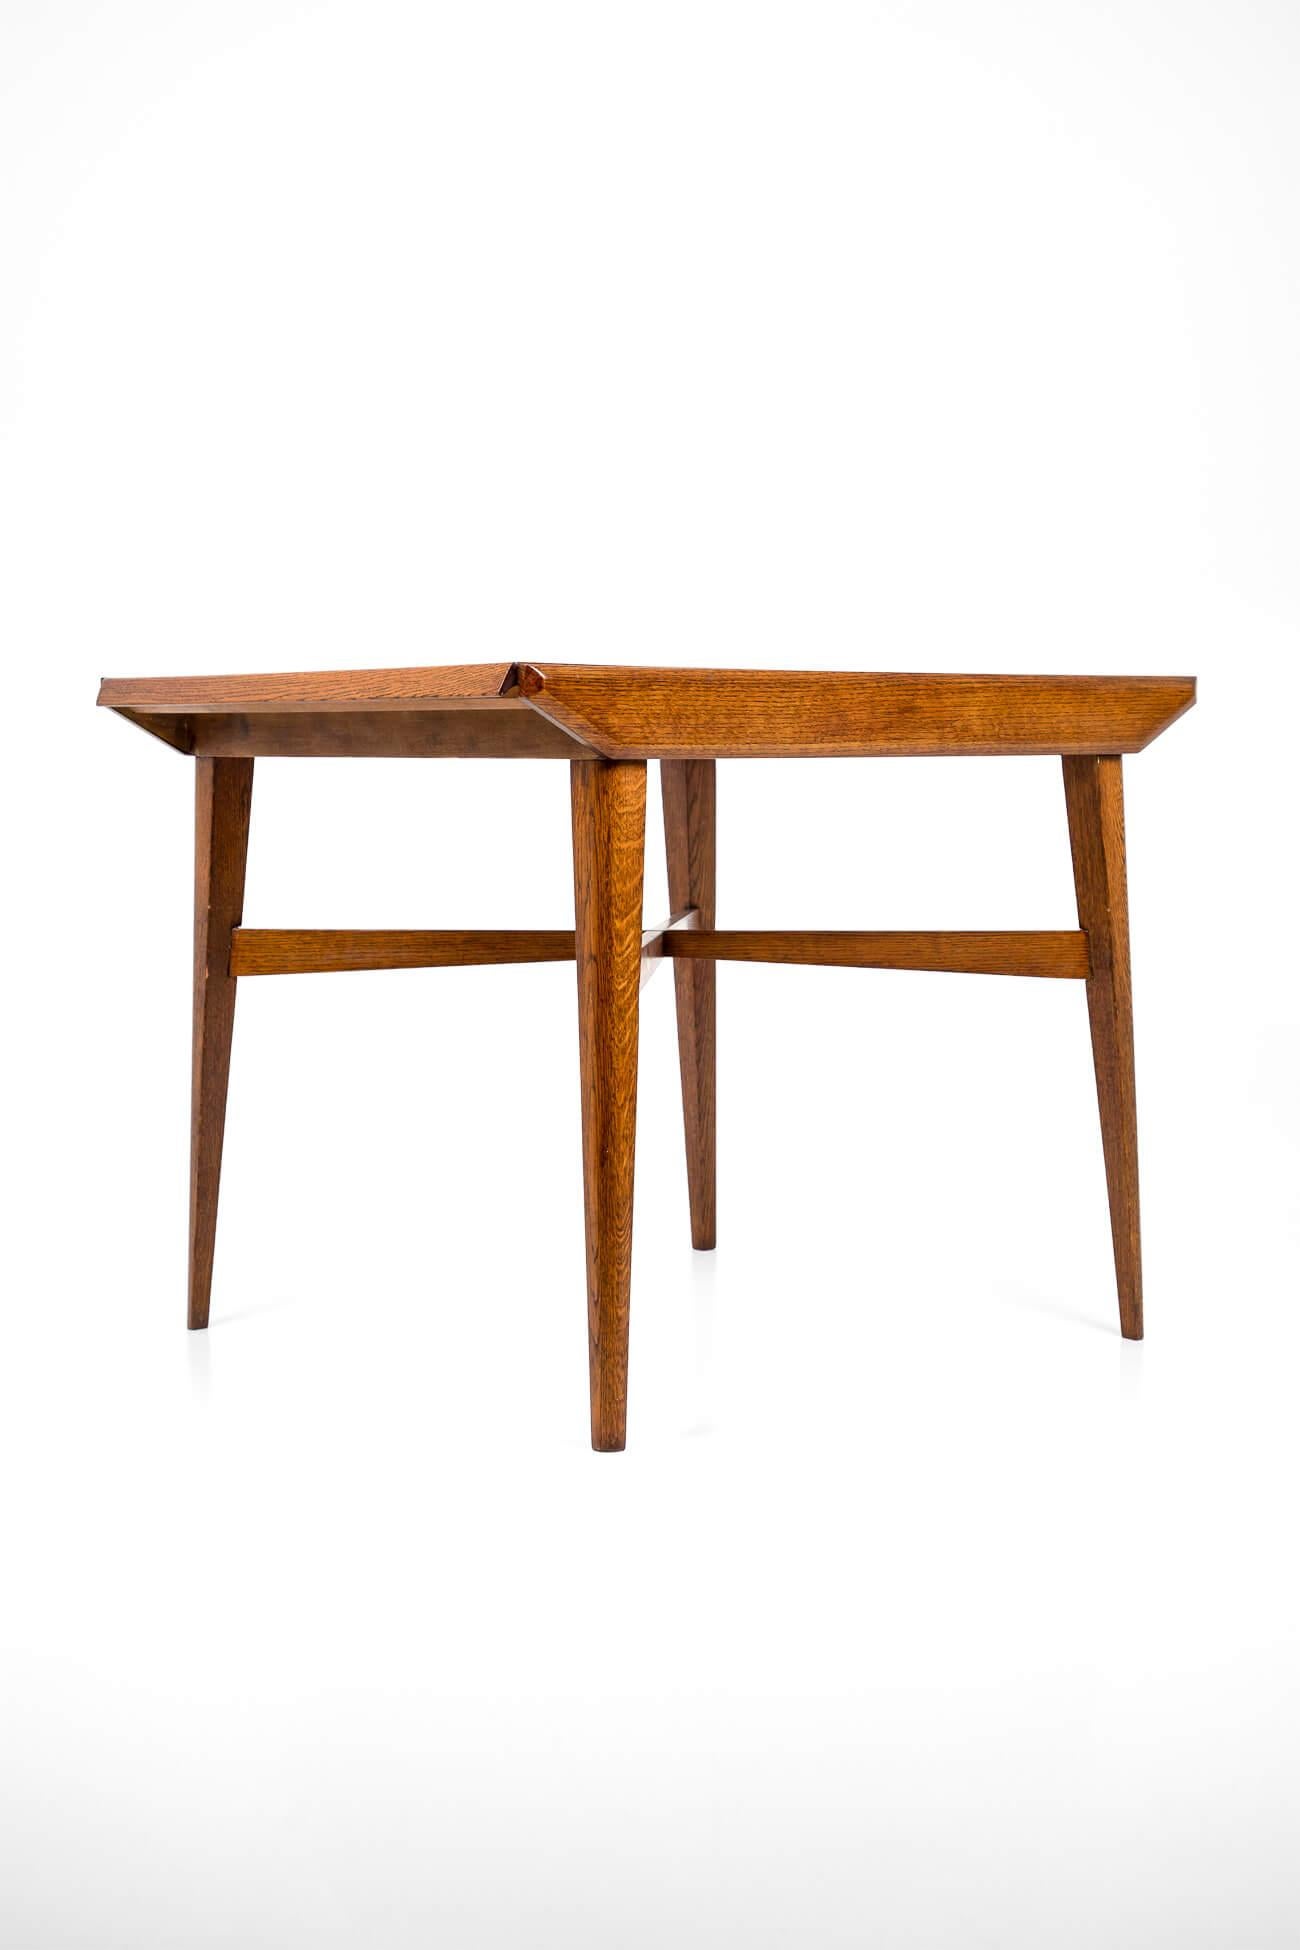 Original mid-century extending dining table of wonderful proportions by British furniture manufacturer Harris Lebus. Made of rich golden oak with canted panel edges and a central revolving table leaf that can be simply locked into position. The